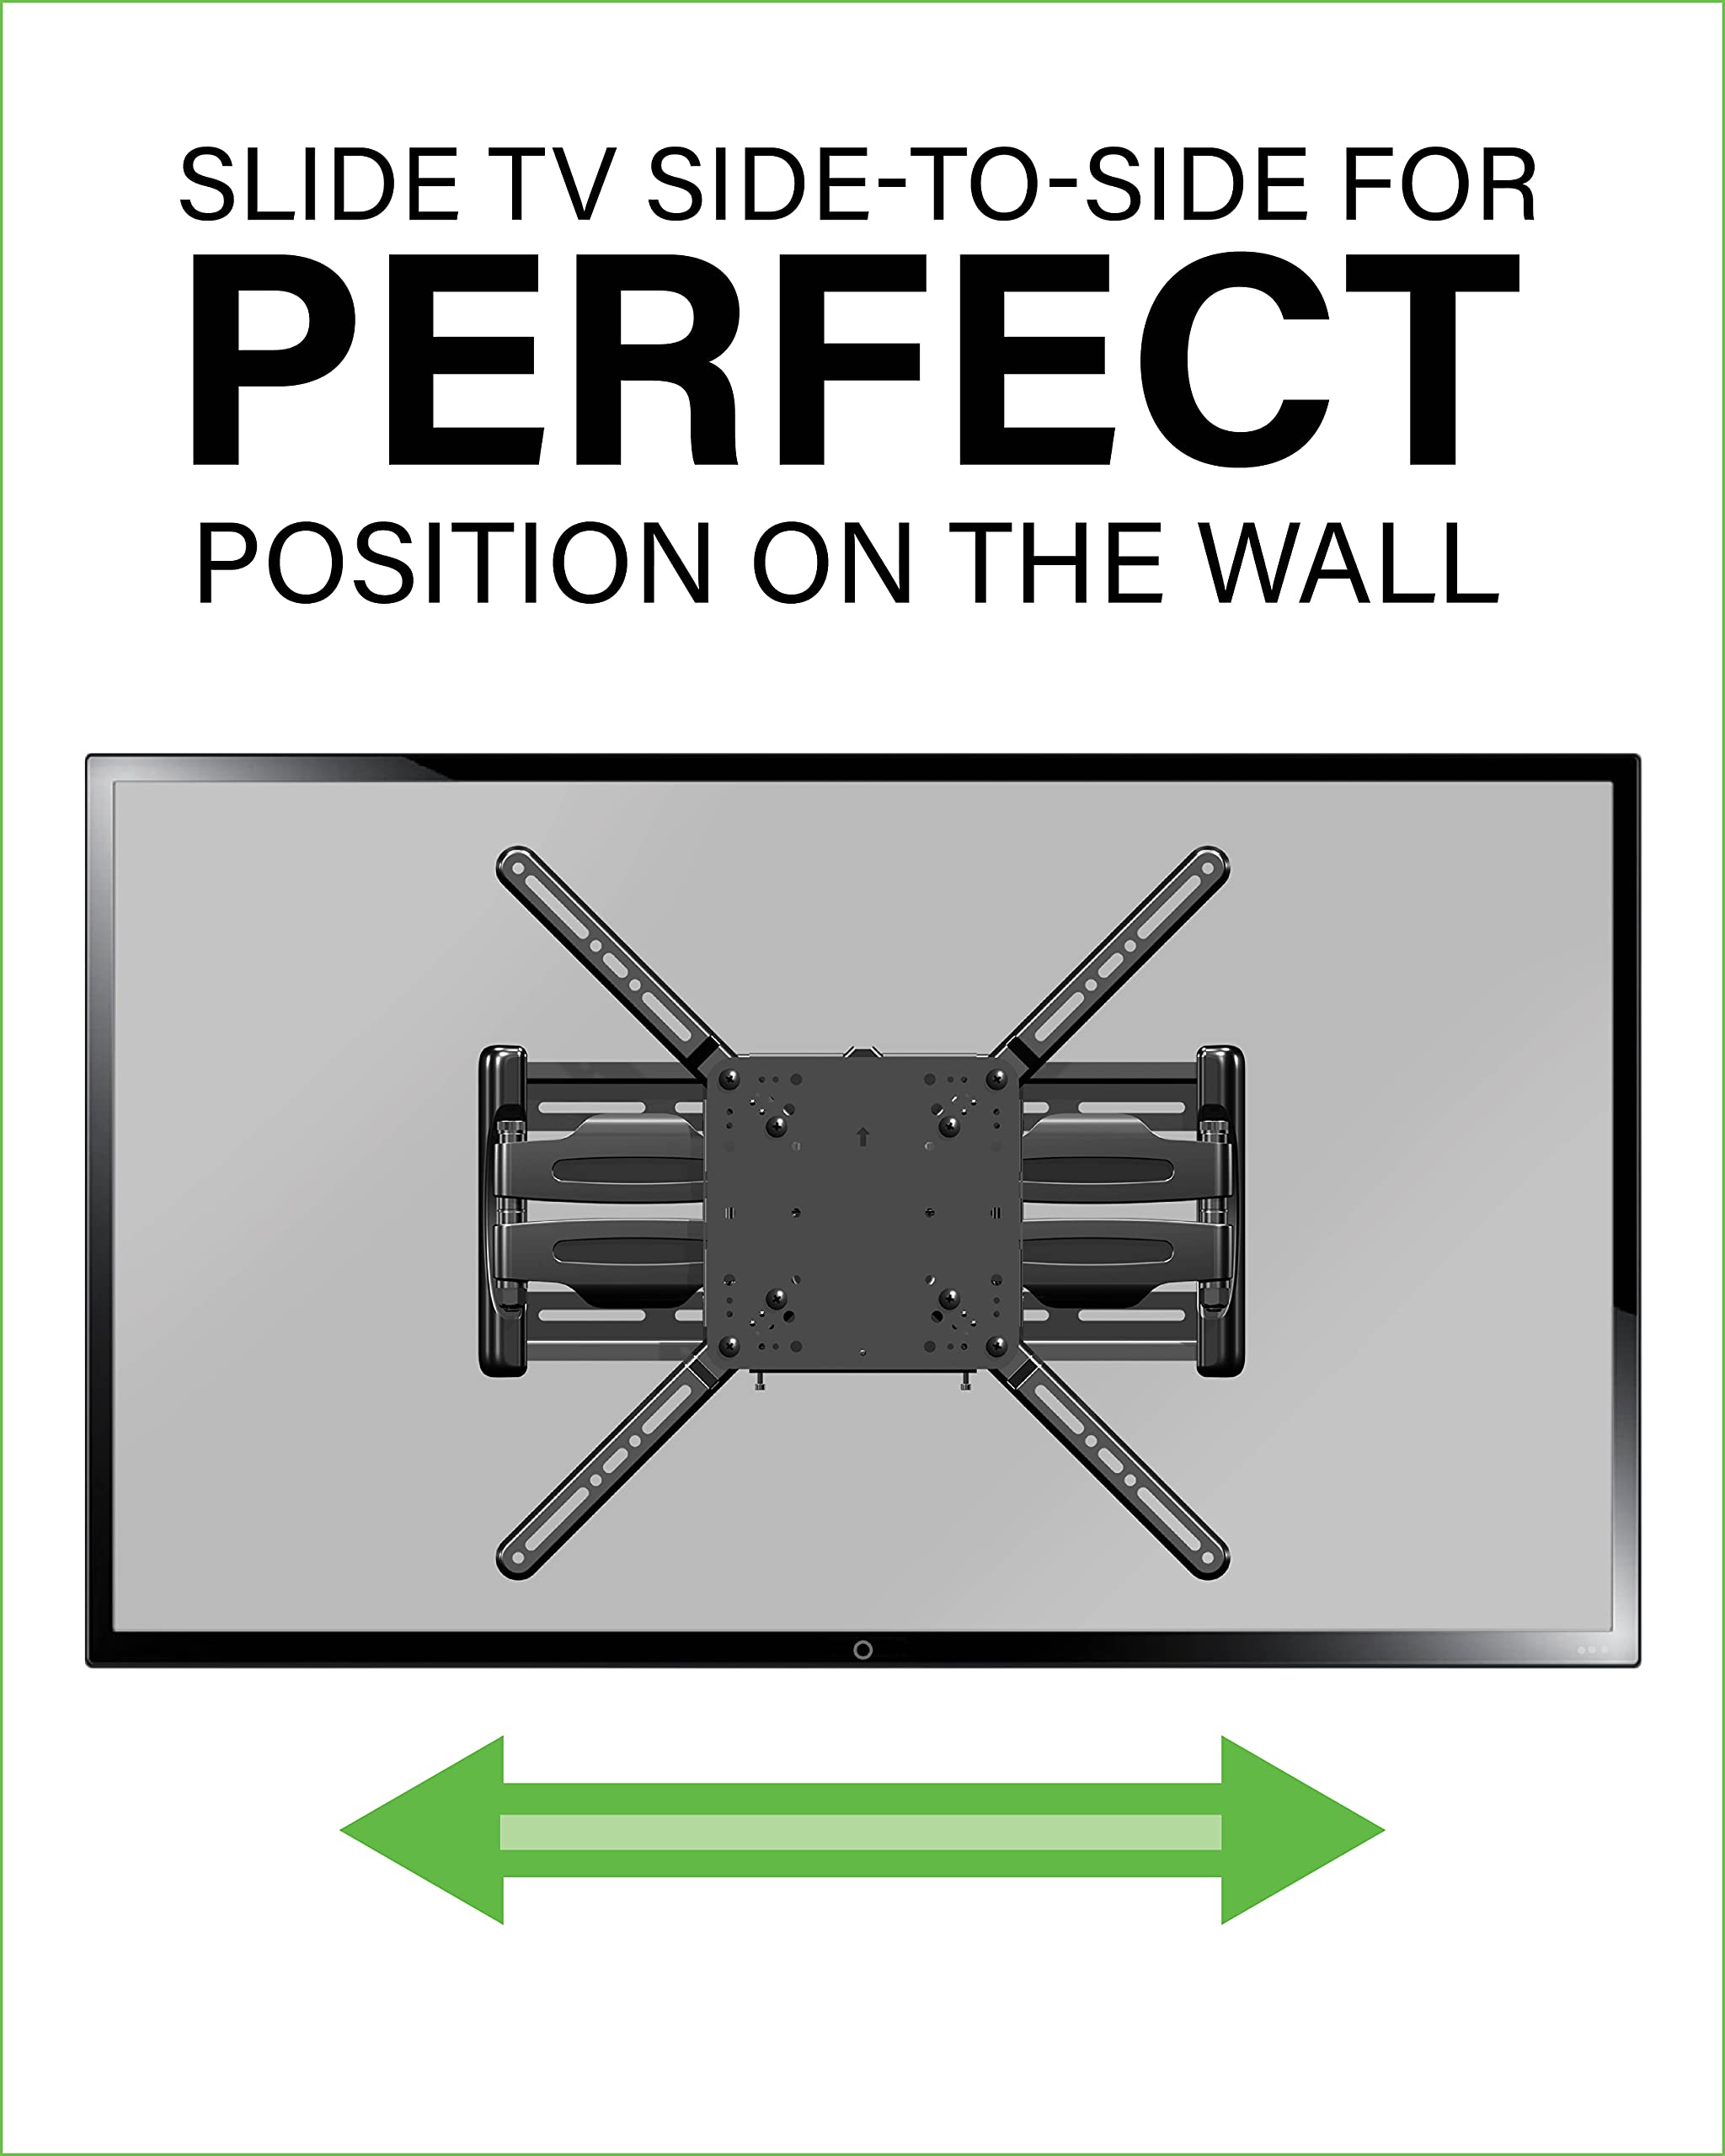 Made for Amazon Universal Full-Motion TV Wall Mount for 50-82